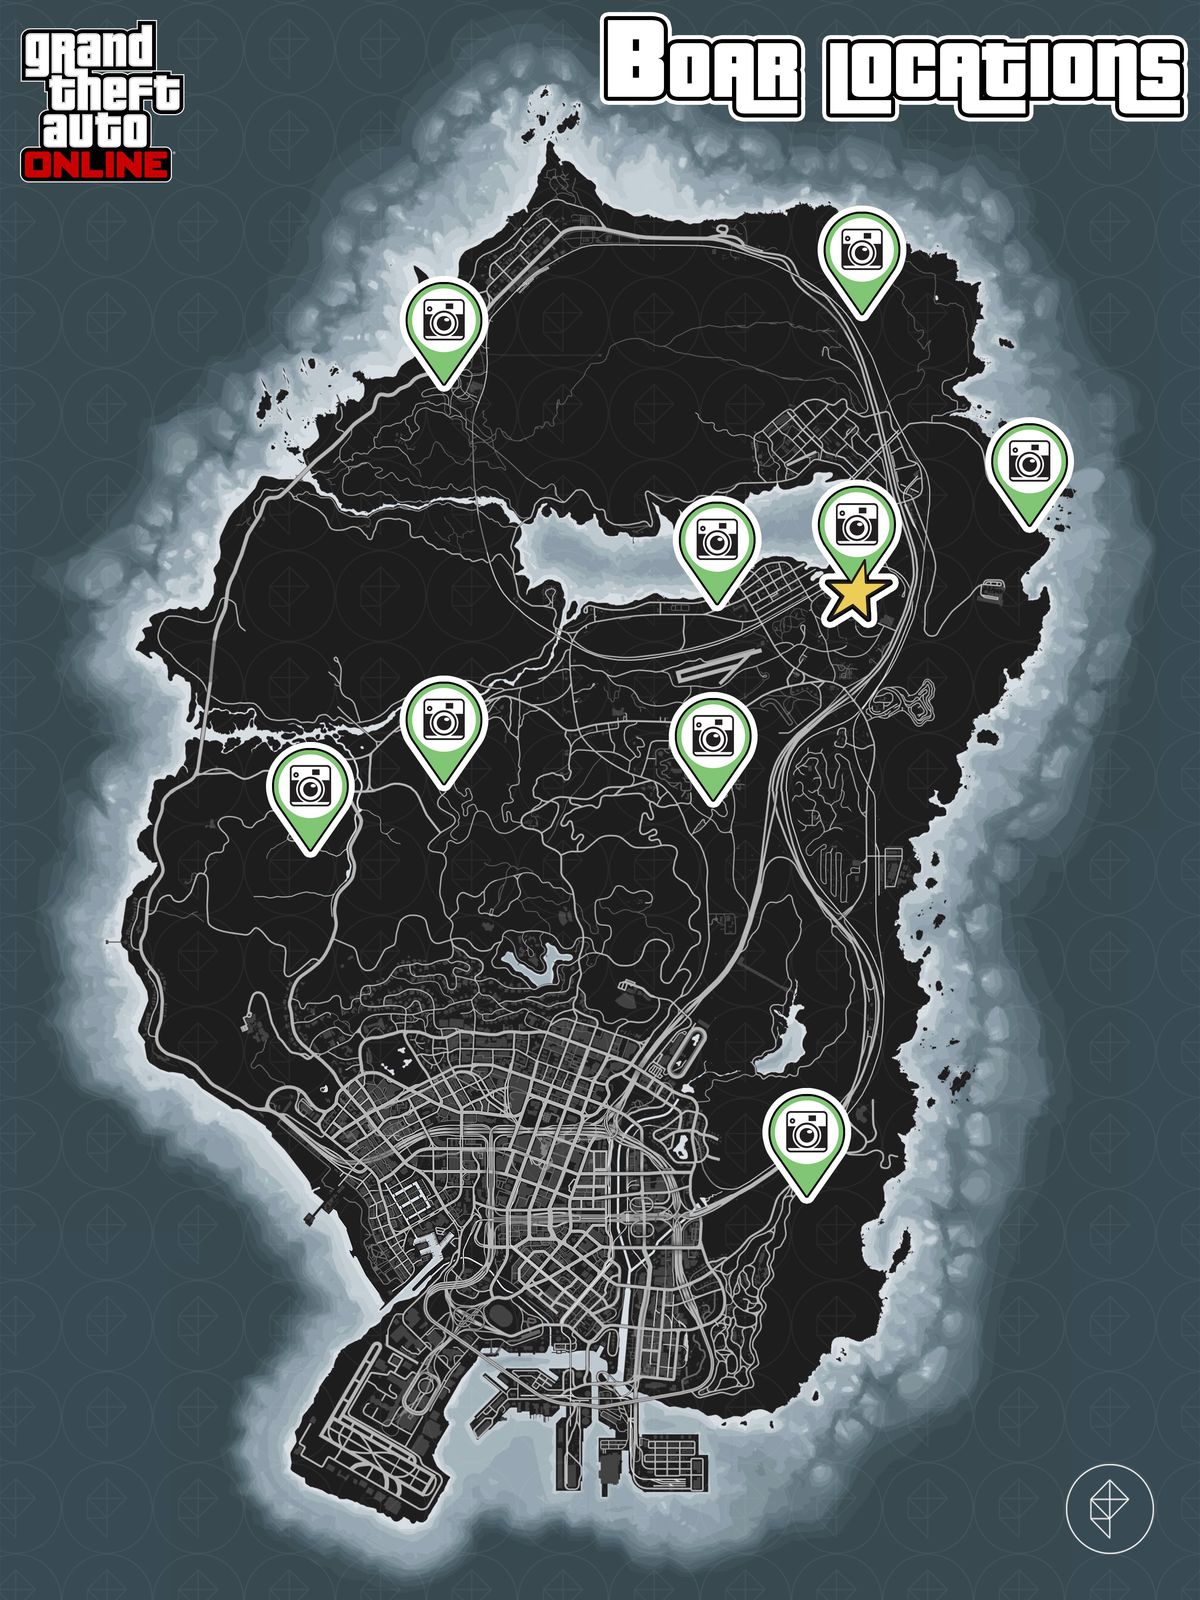 GTA Online map with boar locations